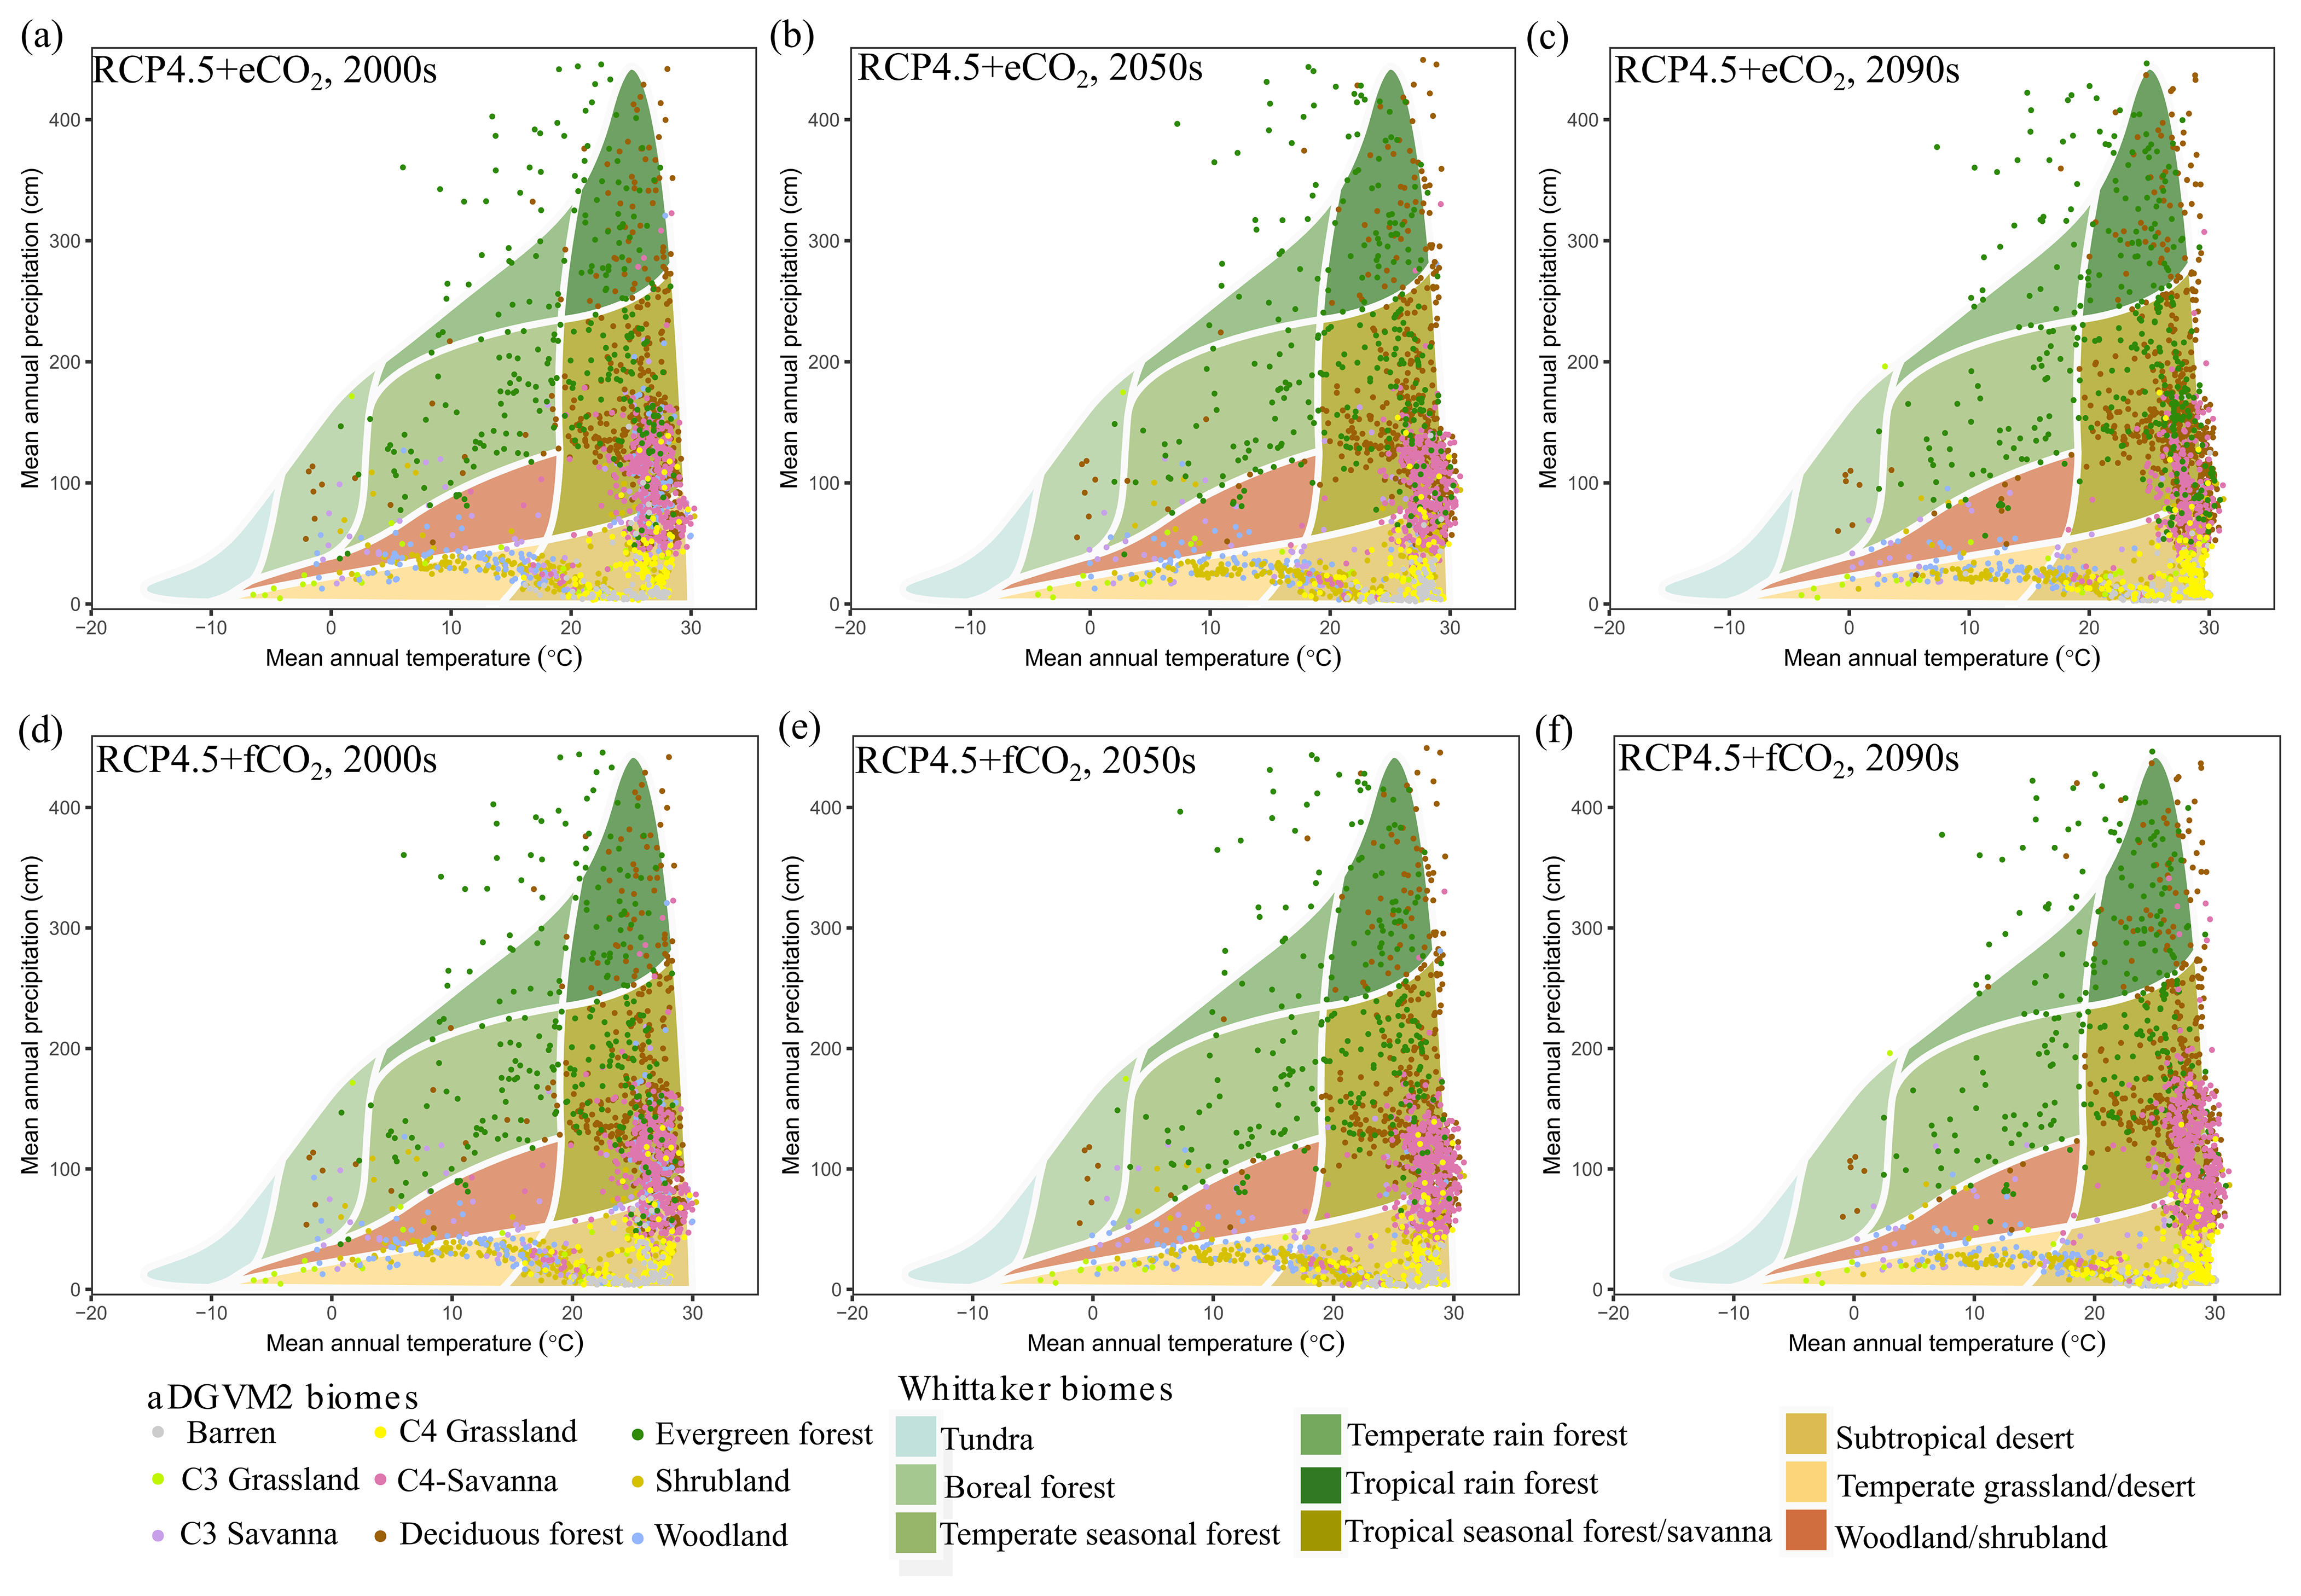 Bg Climate Change And Elevated Co2 Favor Forest Over Savanna Under Different Future Scenarios In South Asia